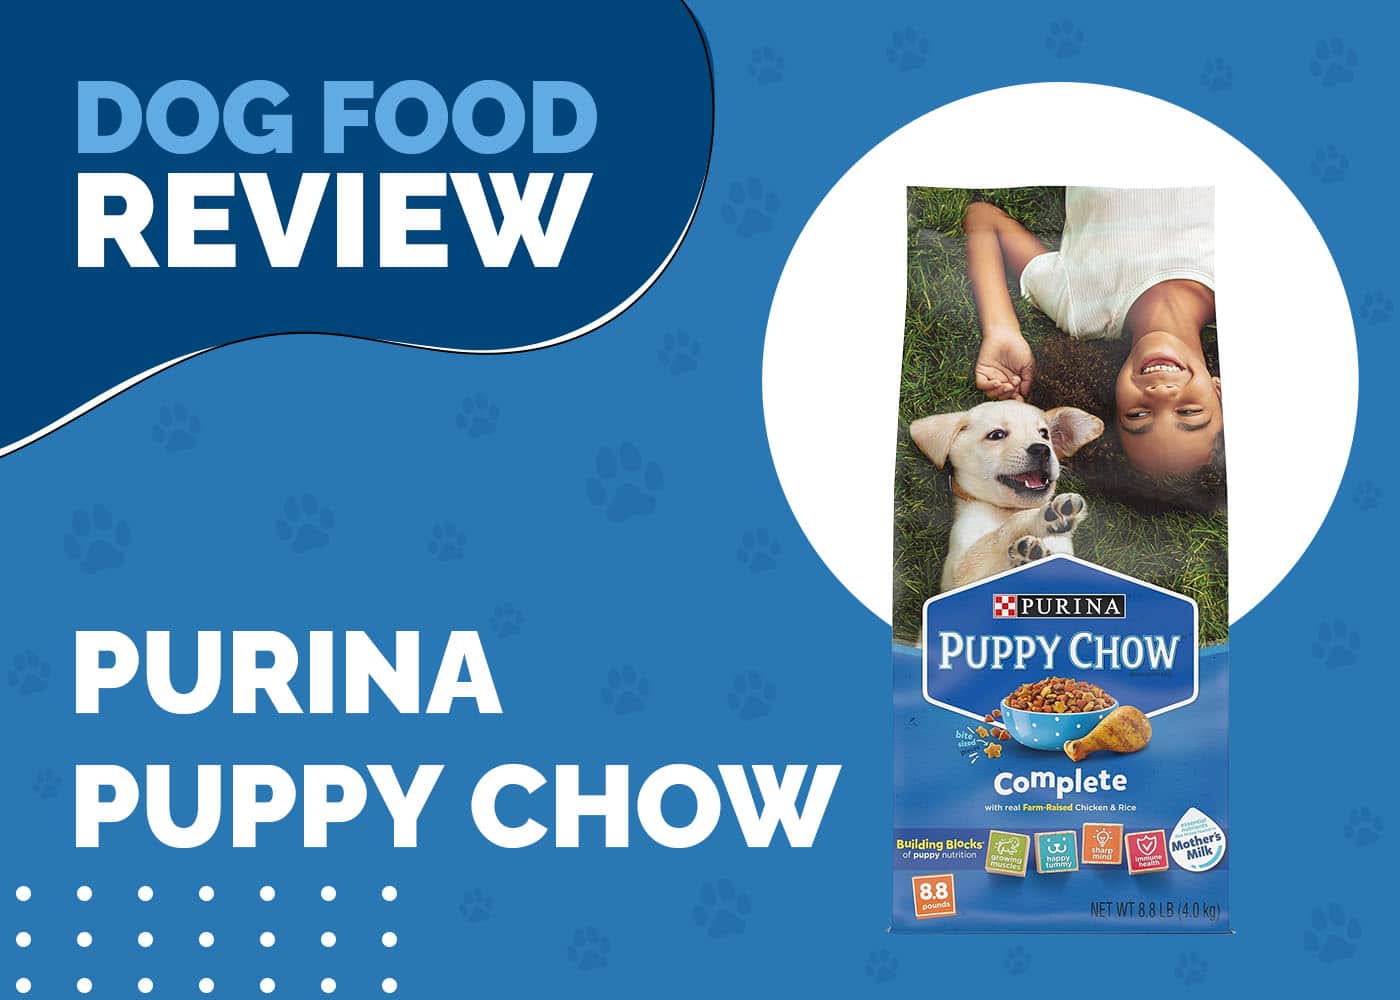 Purina Puppy Chow Dog Food Review